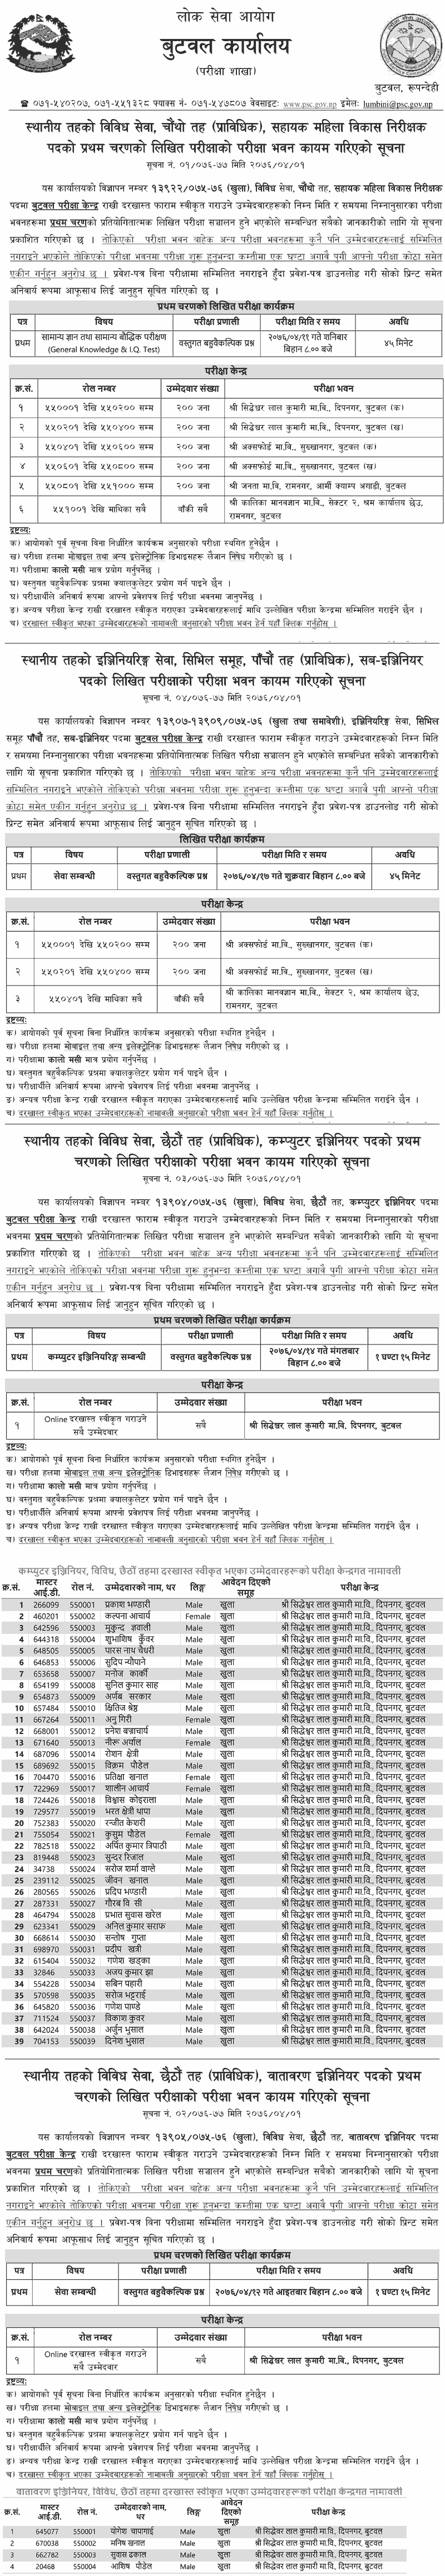 Local Level Technical 4th, 5th and 6th Level Written Exam Center - Butwal